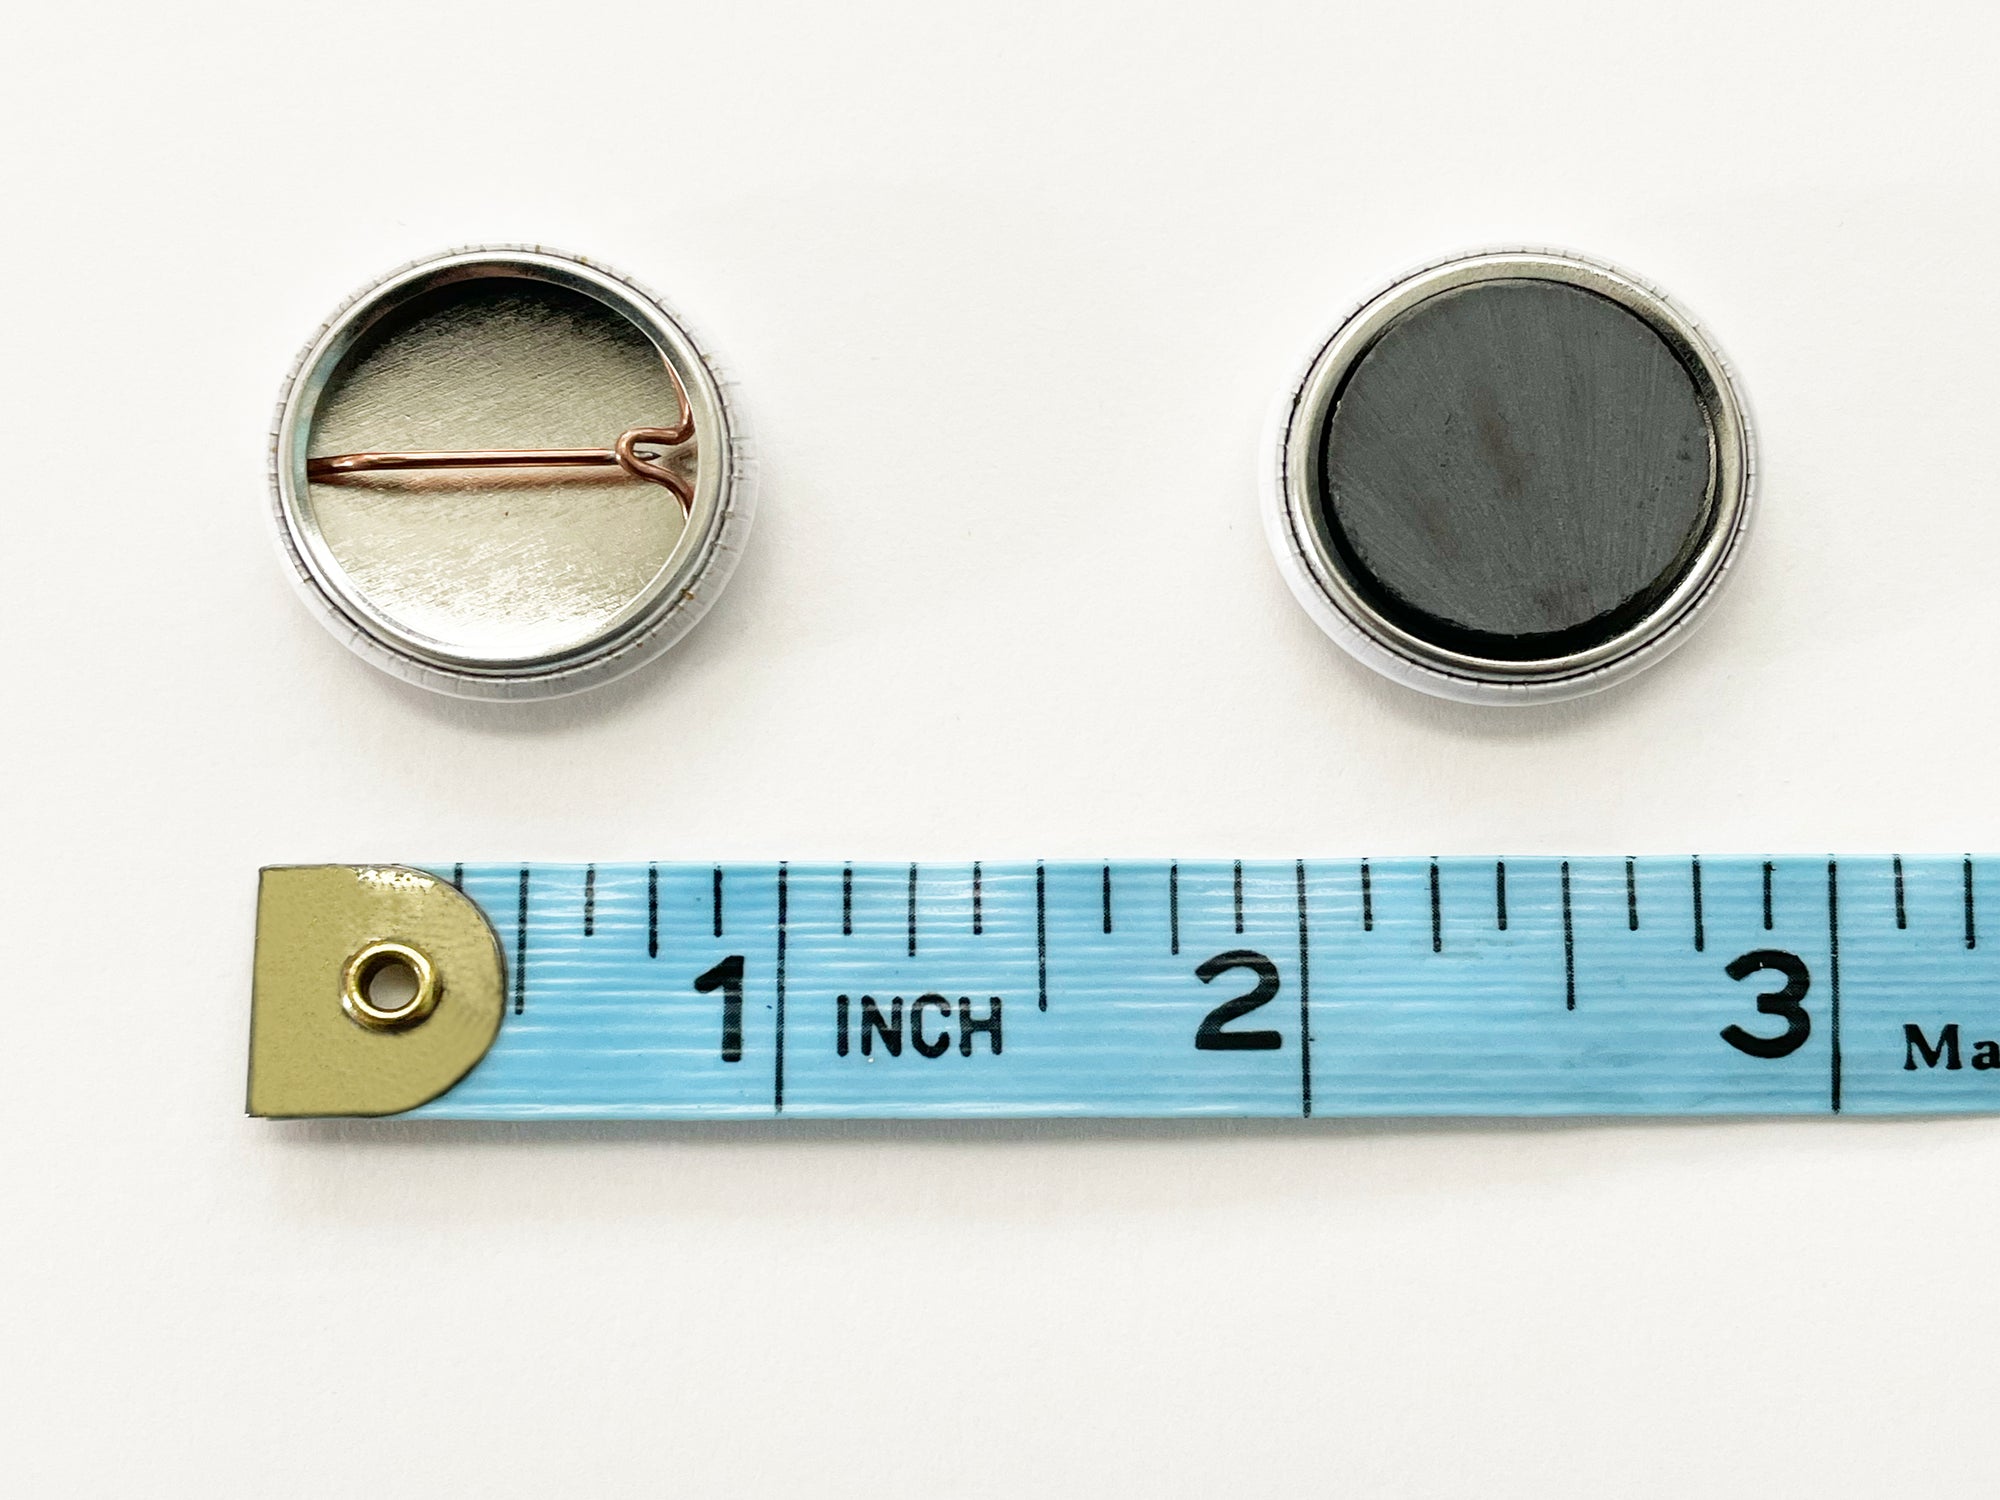 back of pin and magnet showing size